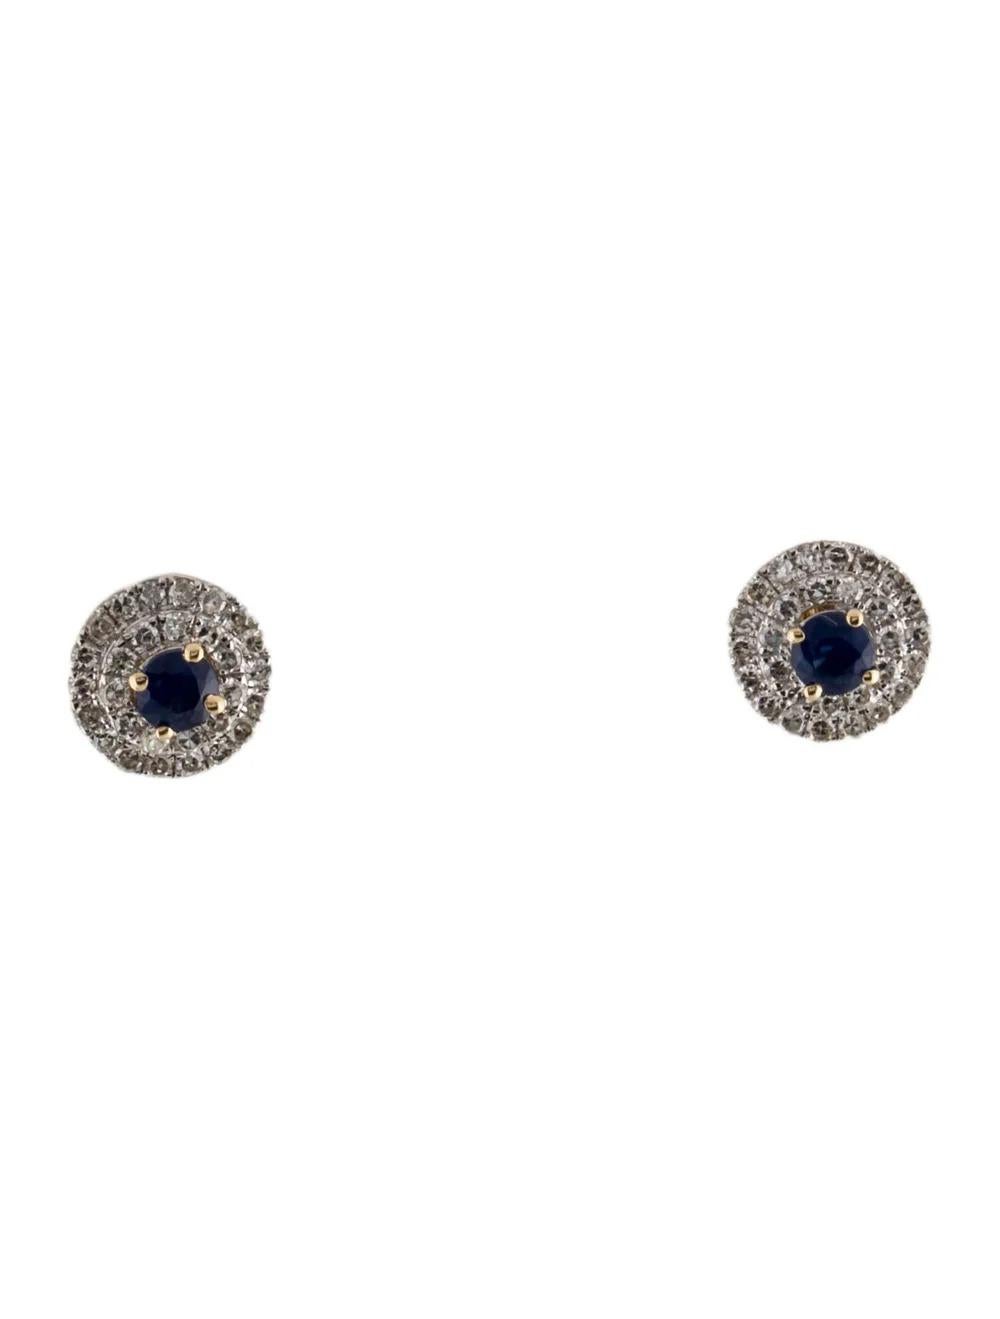 Elevate your style with our exquisite 14K Yellow Gold Sapphire & Diamond Stud Earrings.

Specifications:

* Metal: 14K Yellow Gold
* Length: 0.25